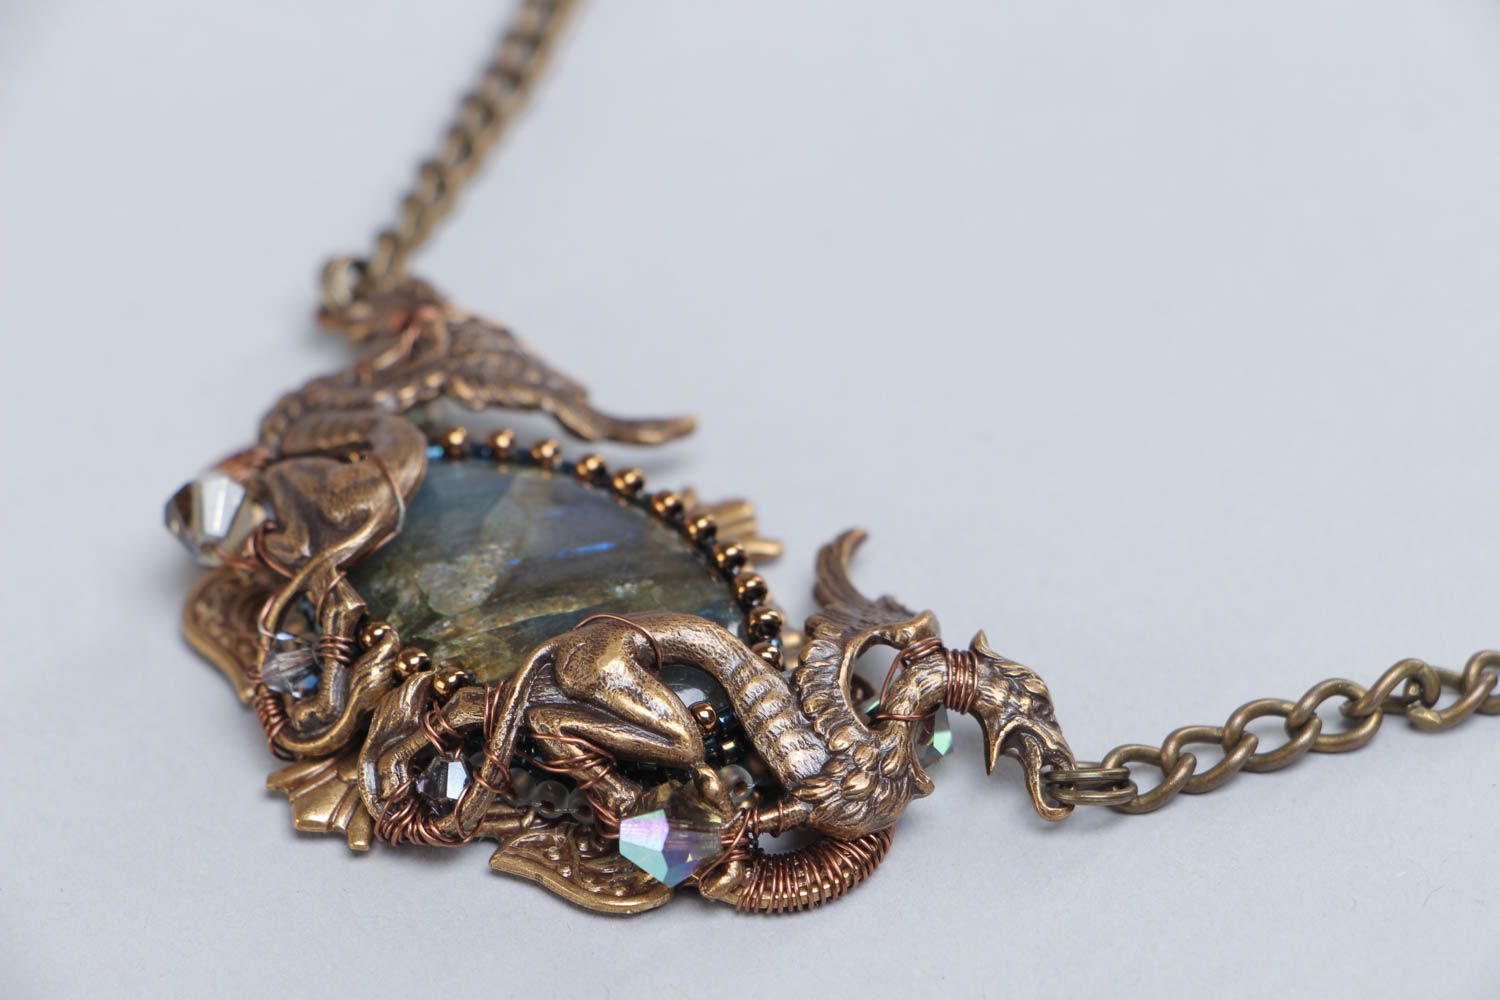 Handmade metal pendant necklace with labradorite stone on chain in elven style photo 3